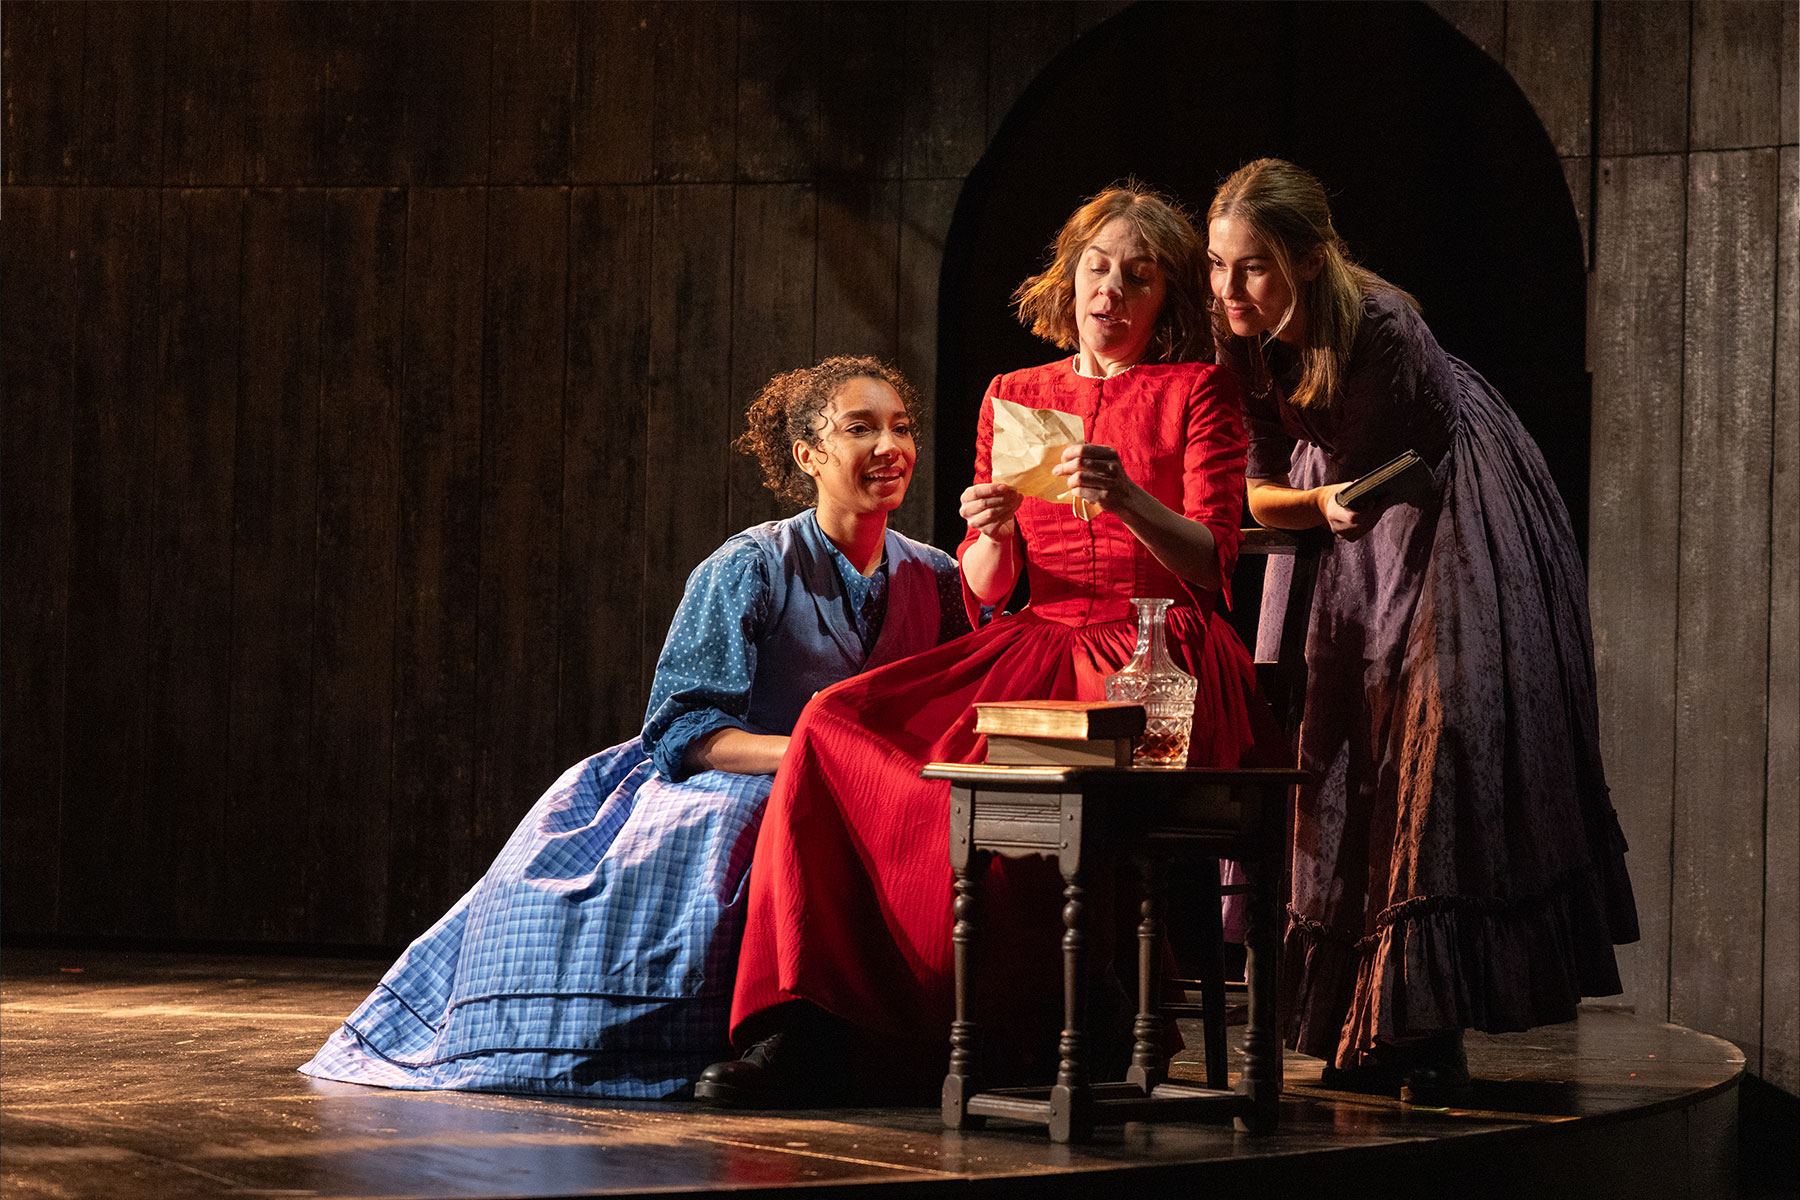 Adele James (as Emily Brontë), Gemma Whelan (as Charlotte Brontë) and Rhiannon Clements (as Anne Brontë) in a scene from Underdog: The Other Other Brontë at the National Theatre